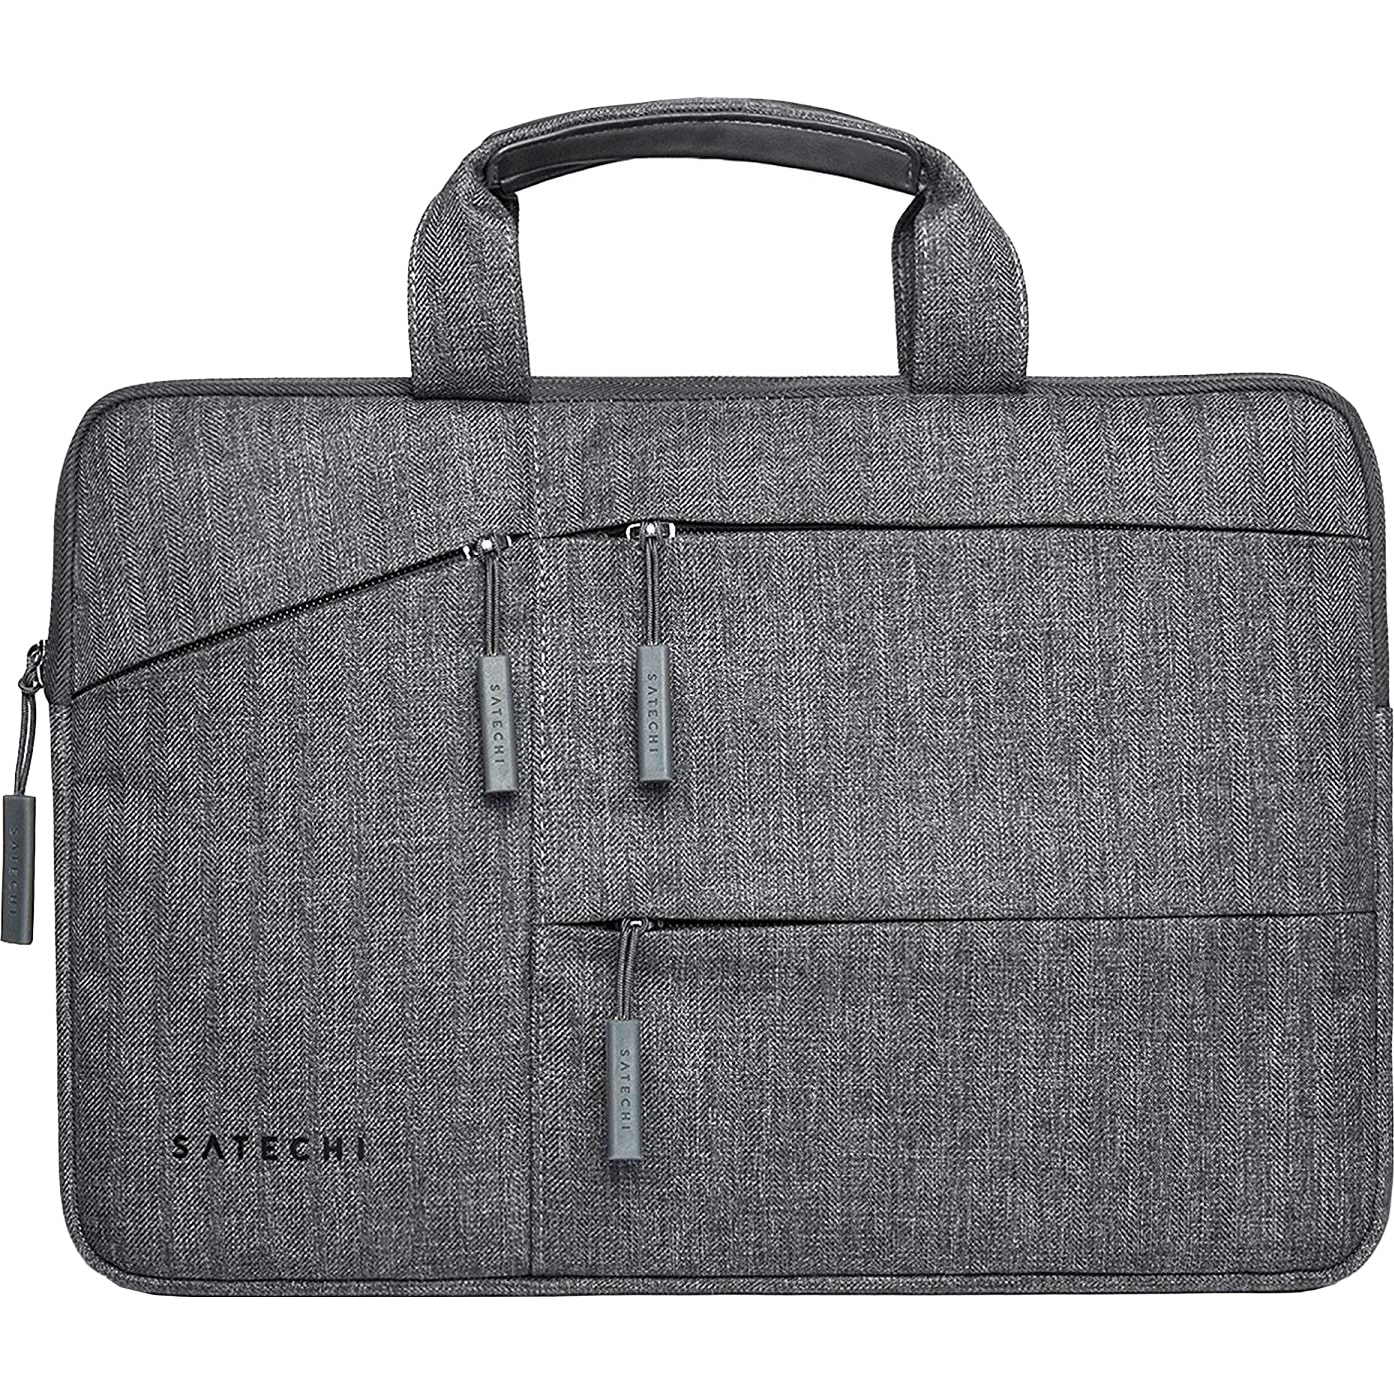 Сумка Satechi Water-Resistant Laptop Carrying Case ST-LTB13